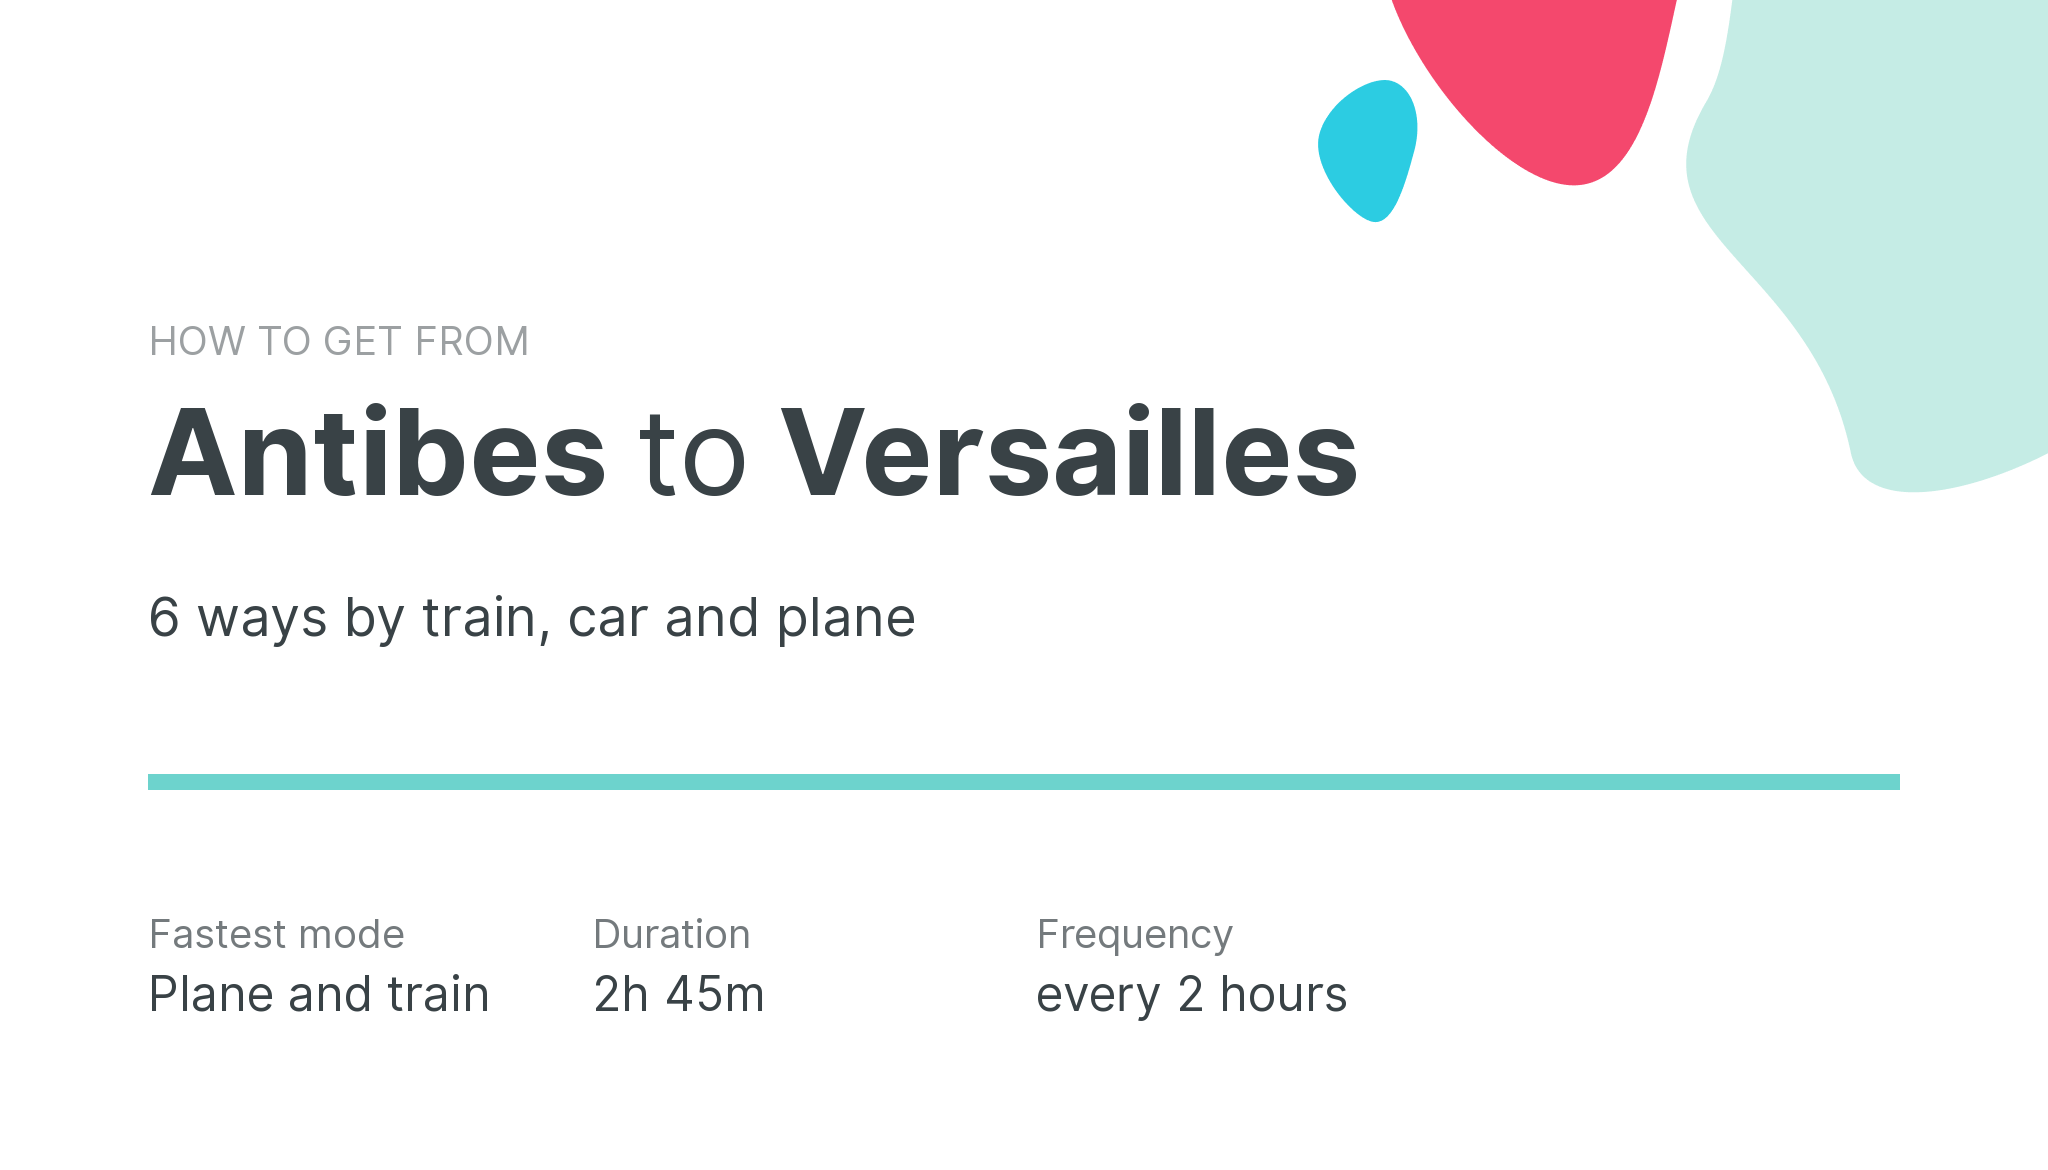 How do I get from Antibes to Versailles